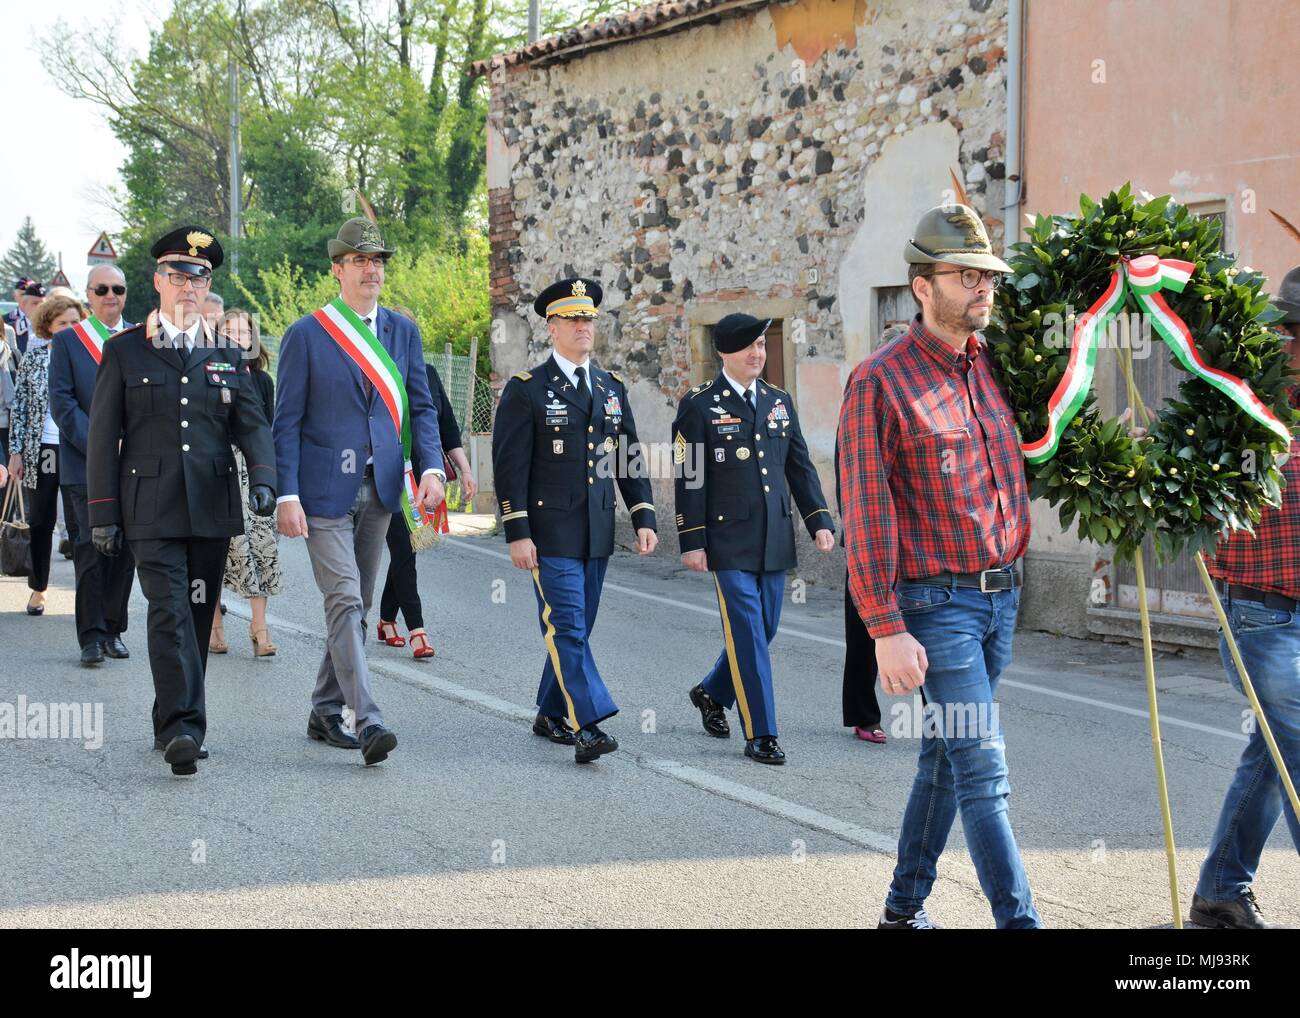 VICENZA, Italy (April 25, 2018) - USAG Italy Garrison Commander Col. Erik  Berdy and Command Sgt. Major Mason Bryant joined mayors from six towns in  Mason Vicentino to mark the 73rd anniversay